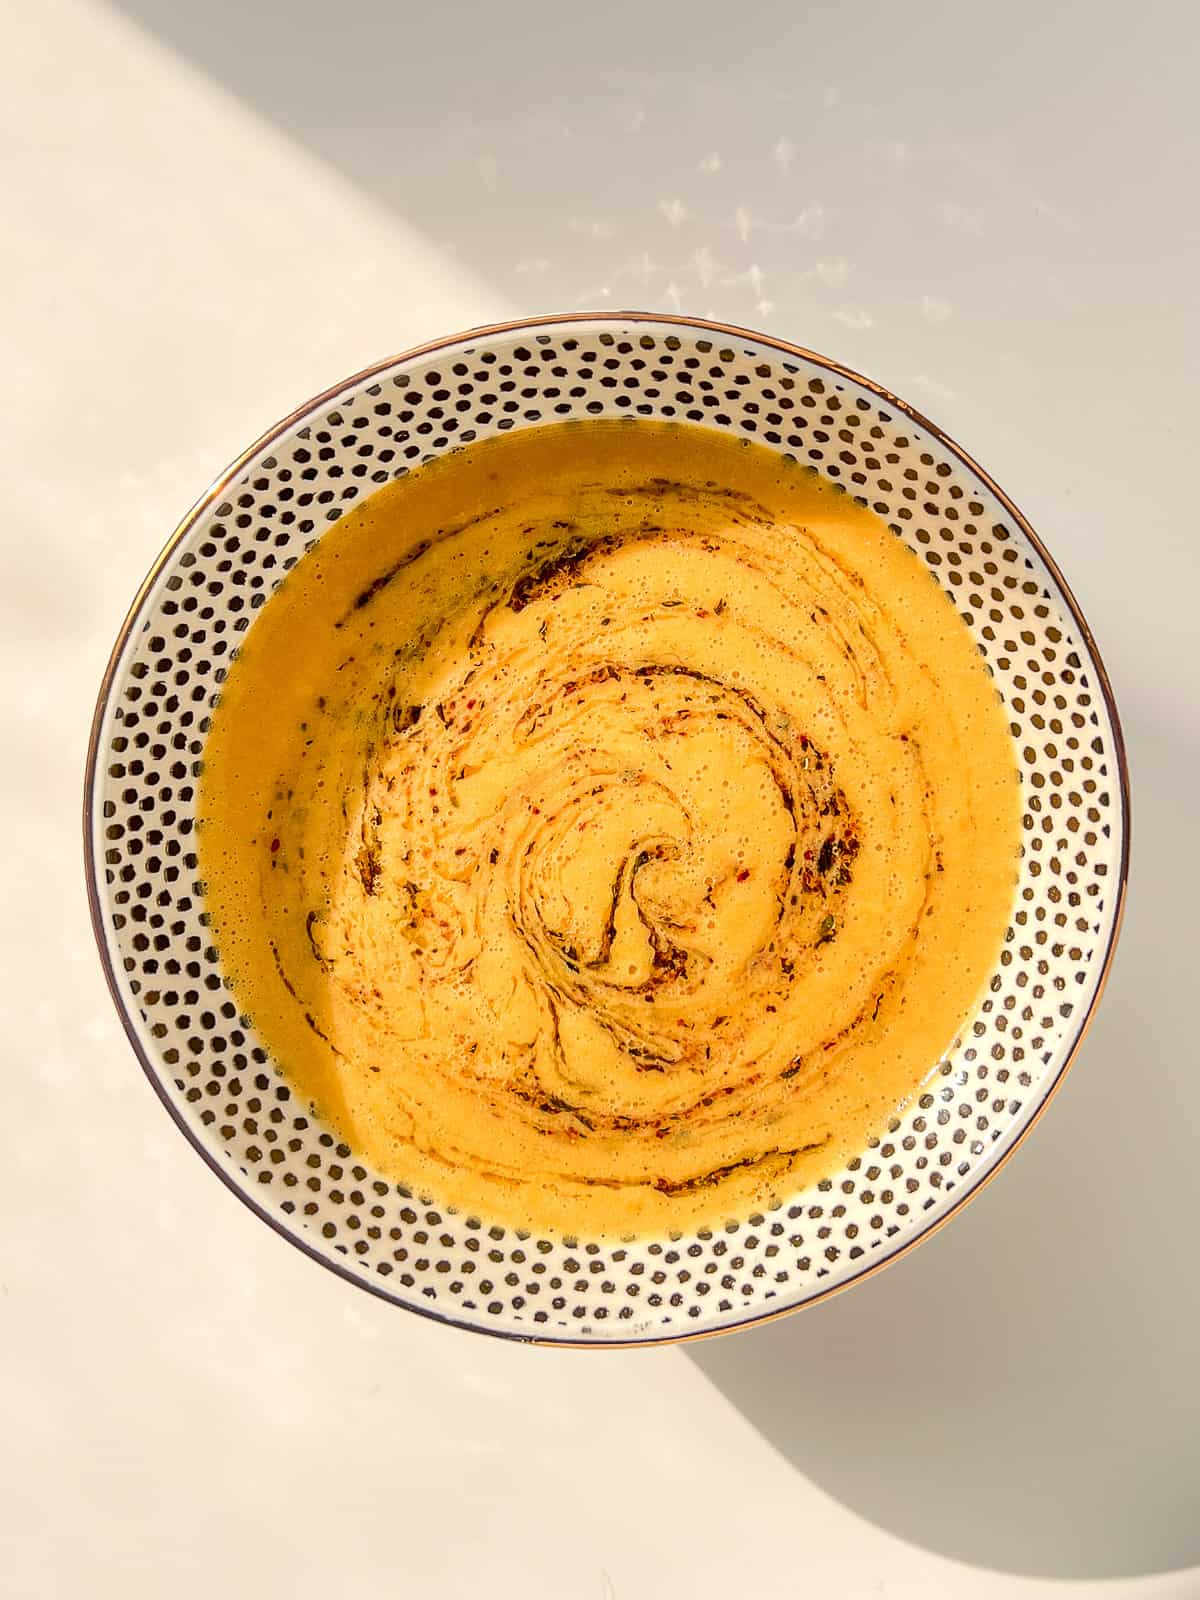 An image of lentil soup topped with sumac and mint butter.